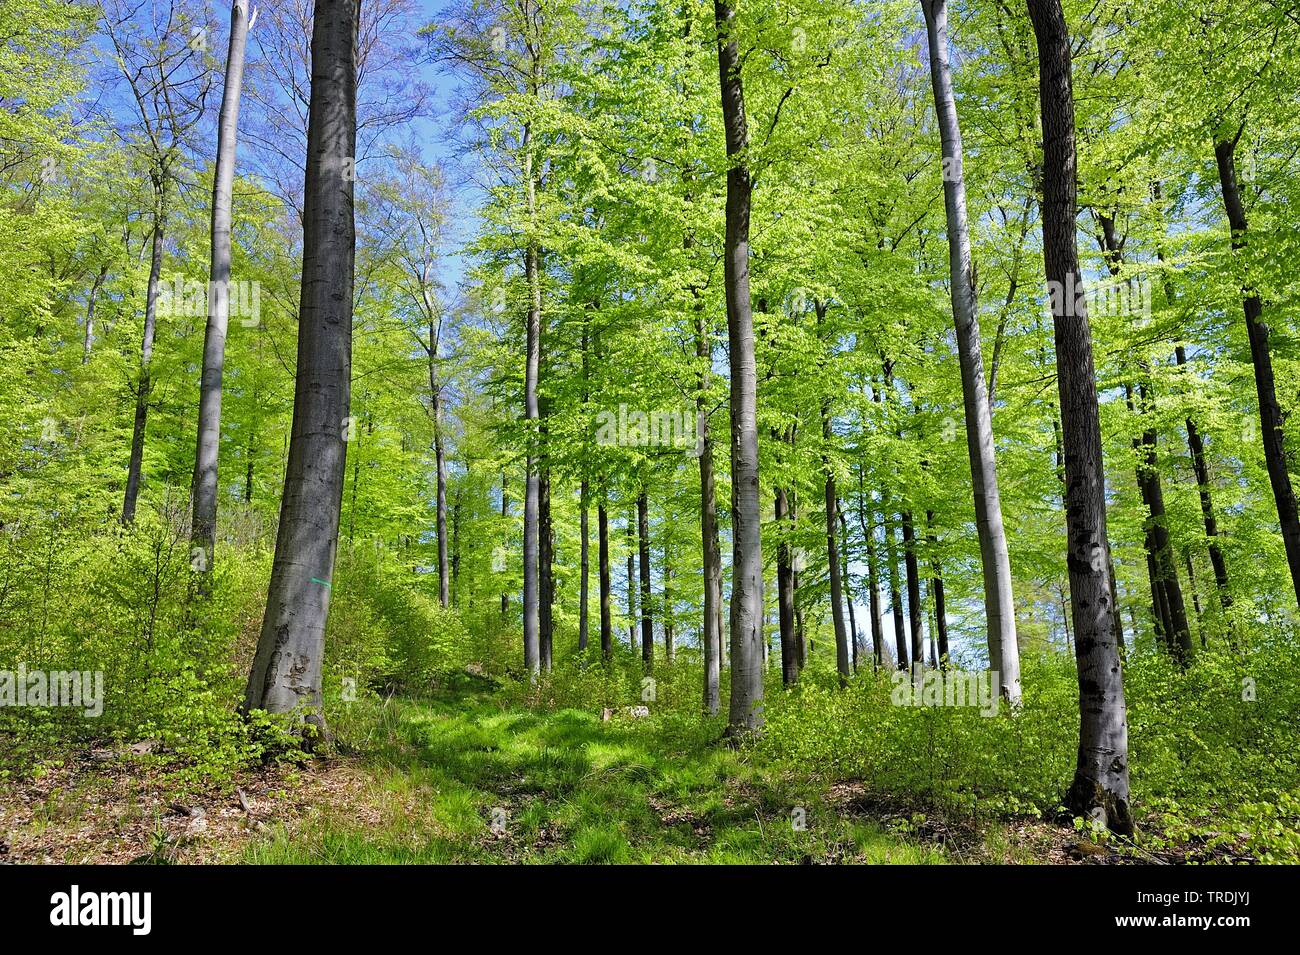 common beech (Fagus sylvatica), beech forest in spring, Germany, North Rhine-Westphalia Stock Photo